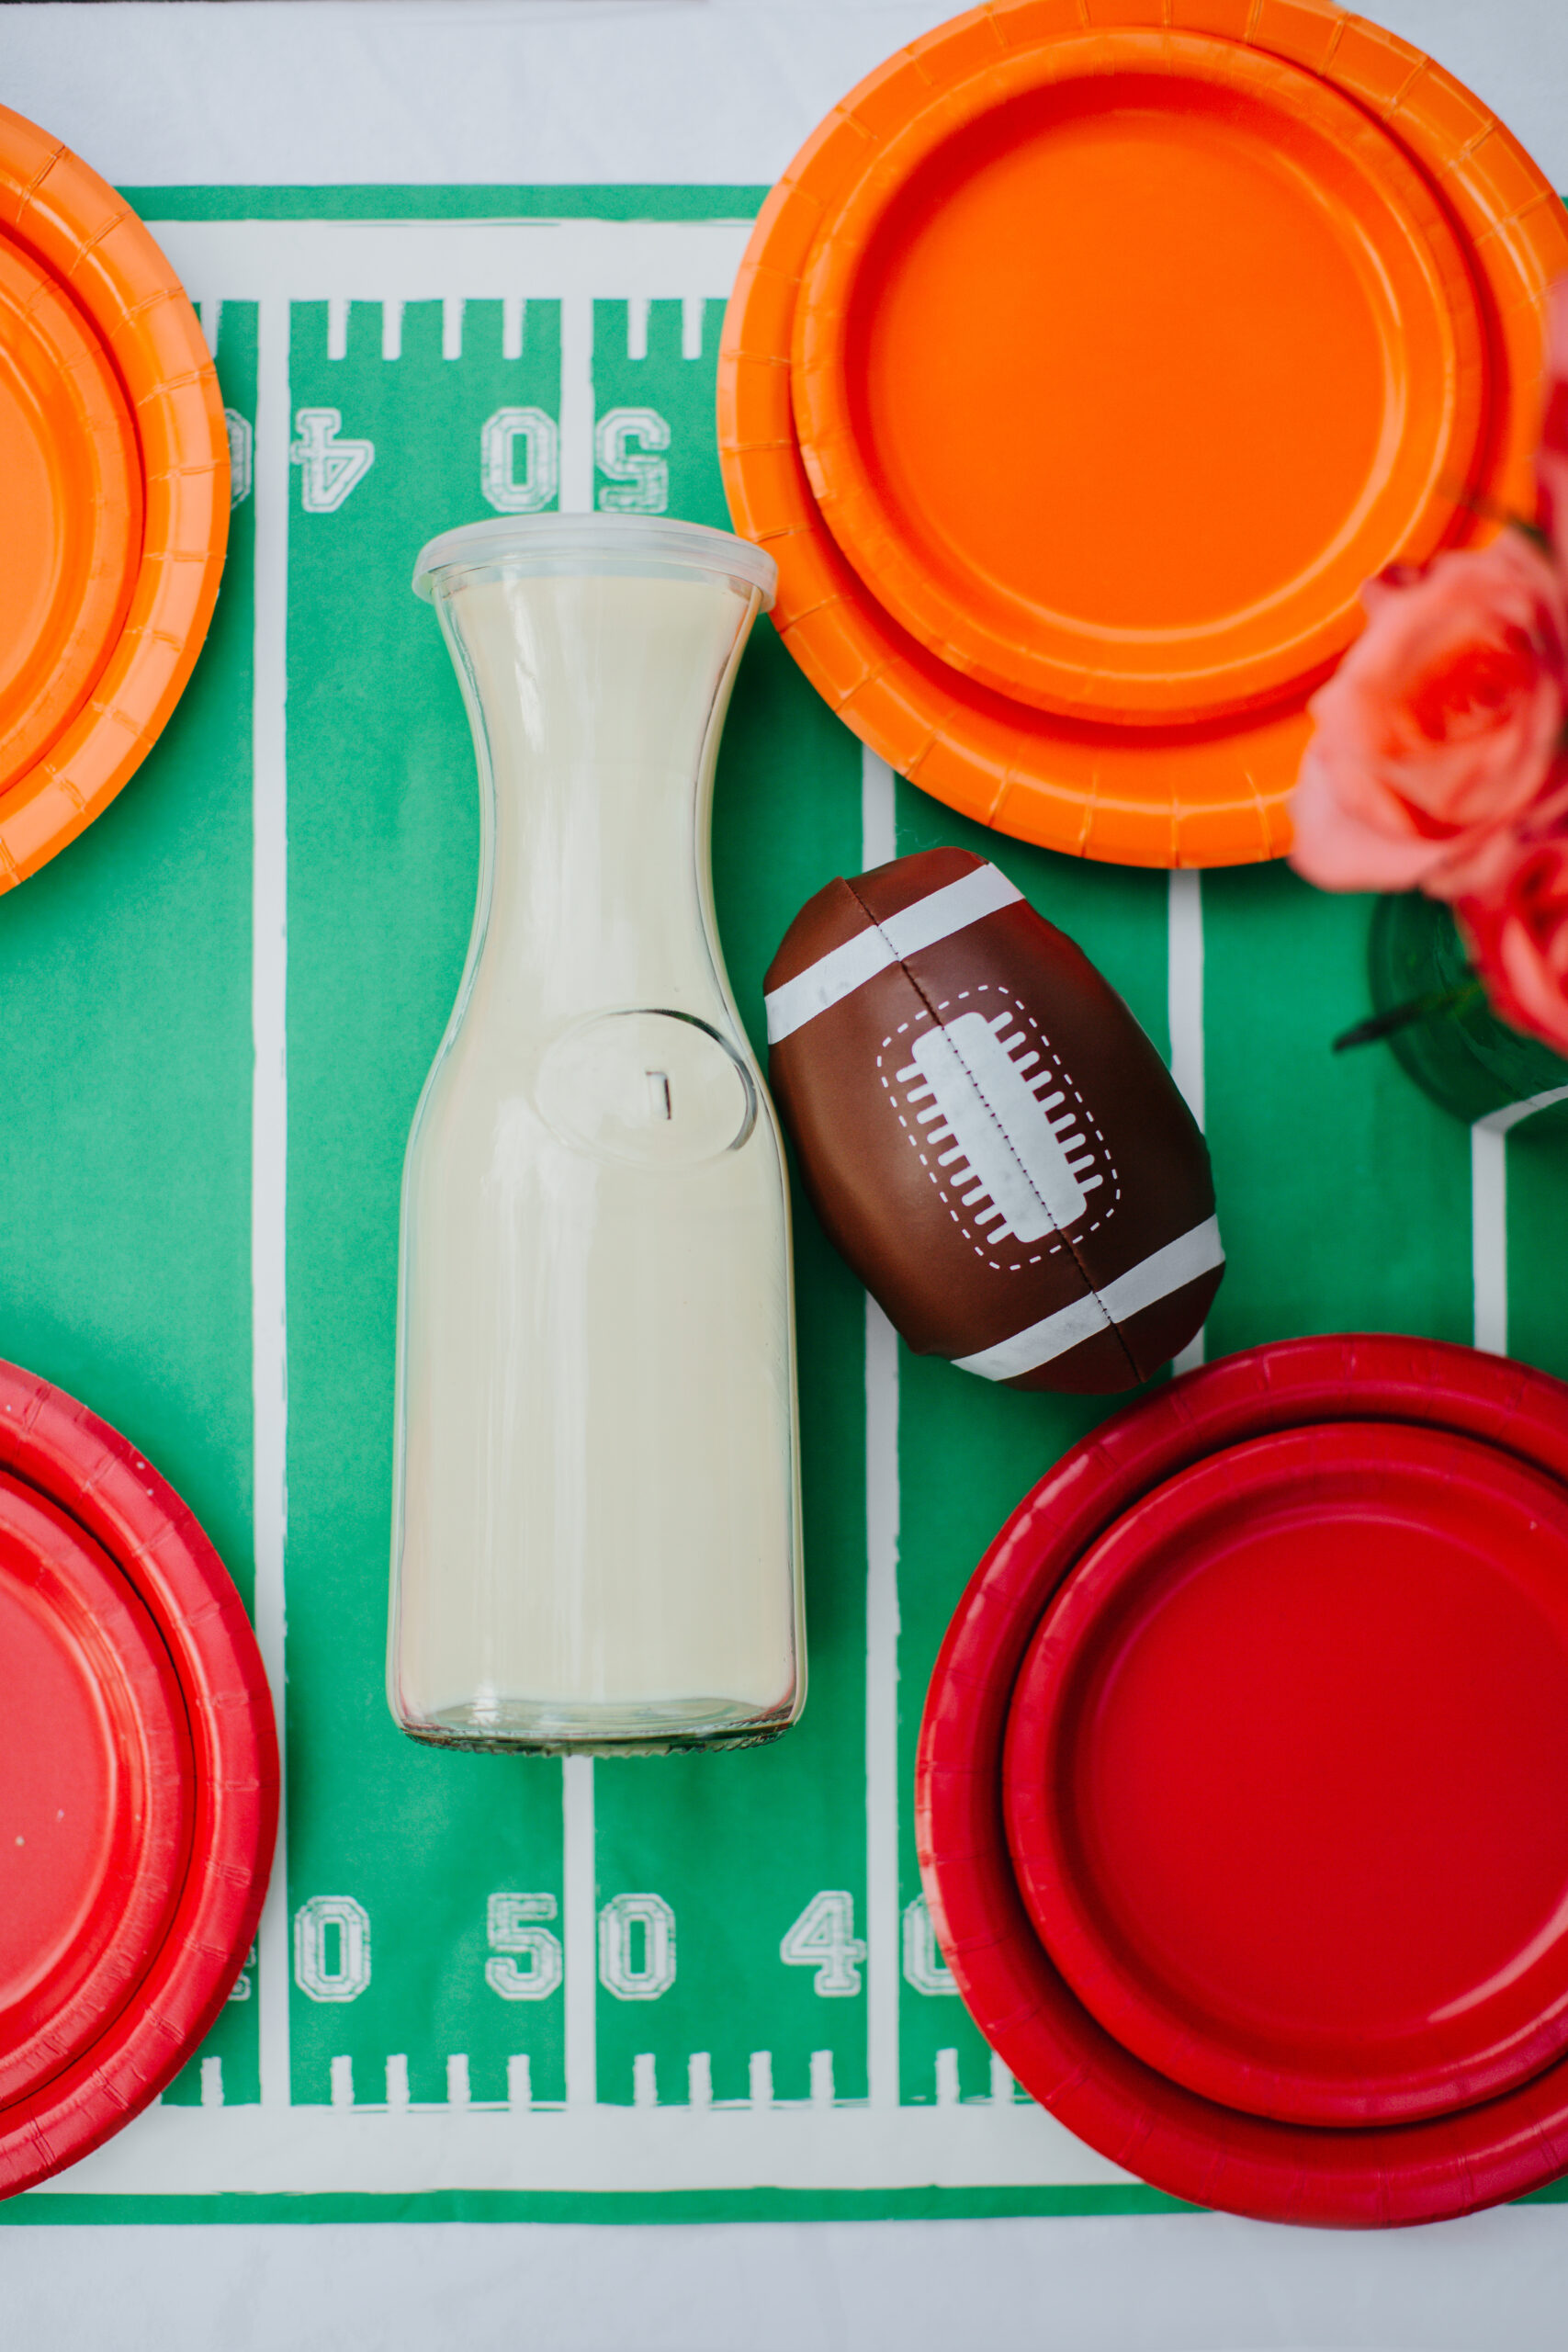 Looking to tailgate this year at your favorite sporting event? CLICK HERE for some awesome tips to tailgate like a pro!